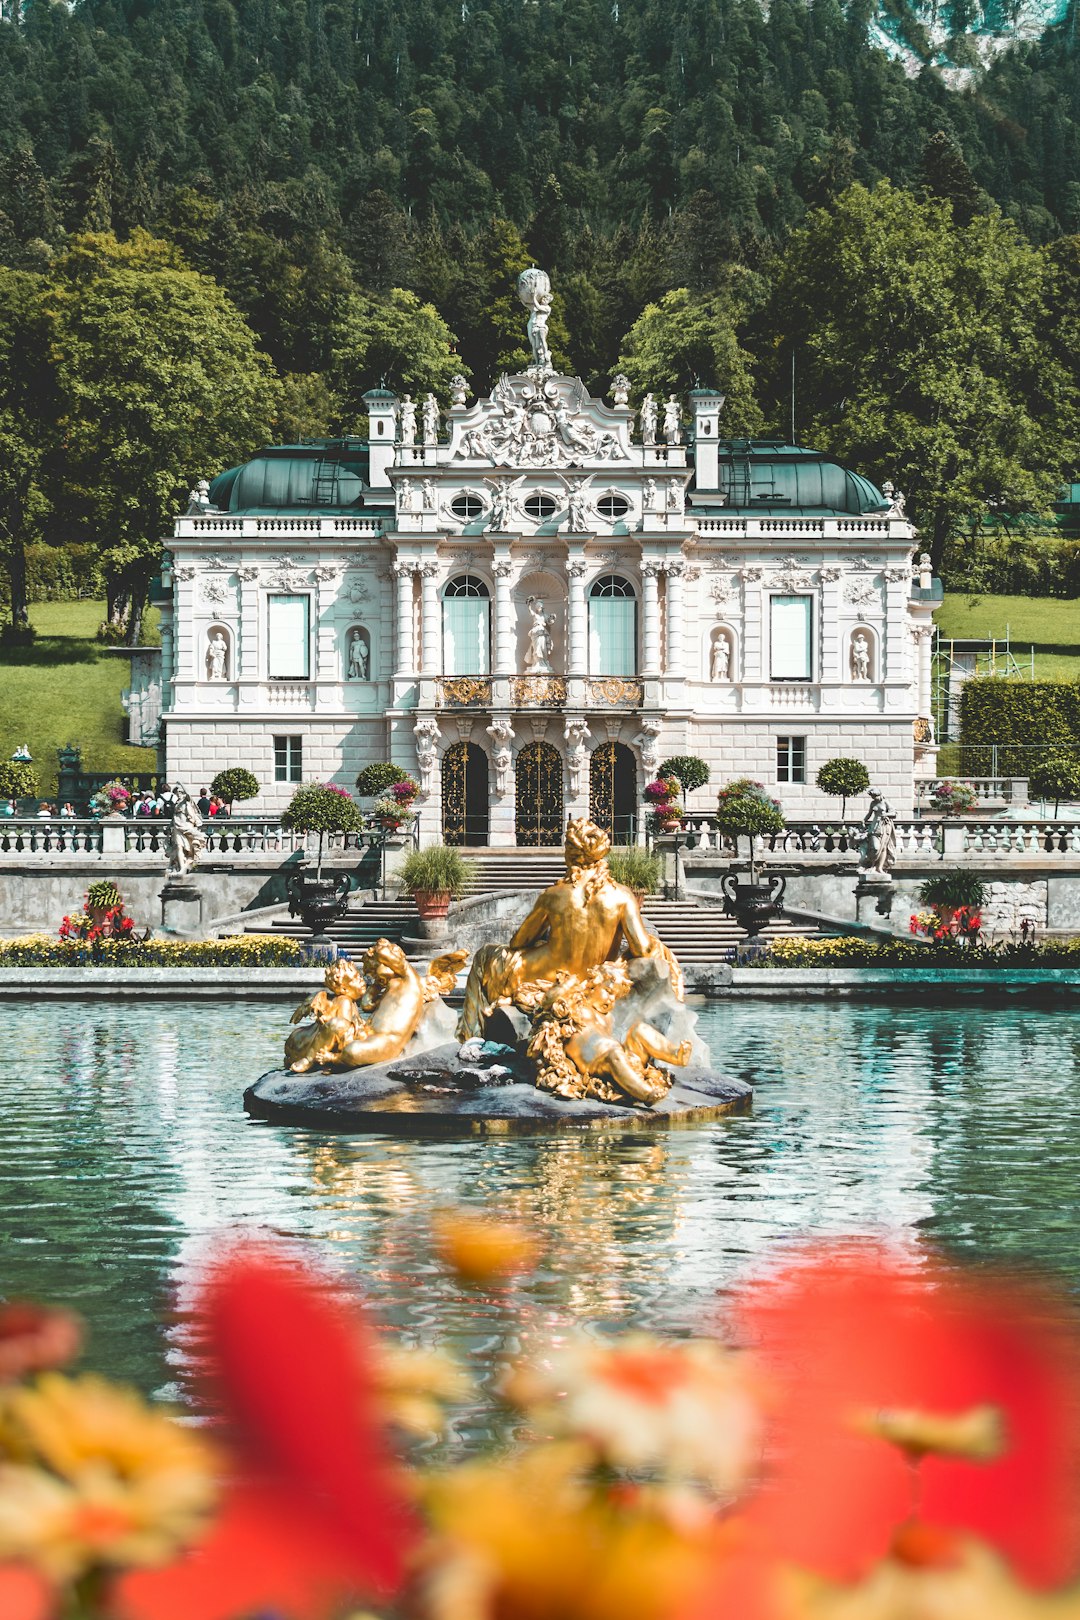 Travel Tips and Stories of Linderhof in Germany